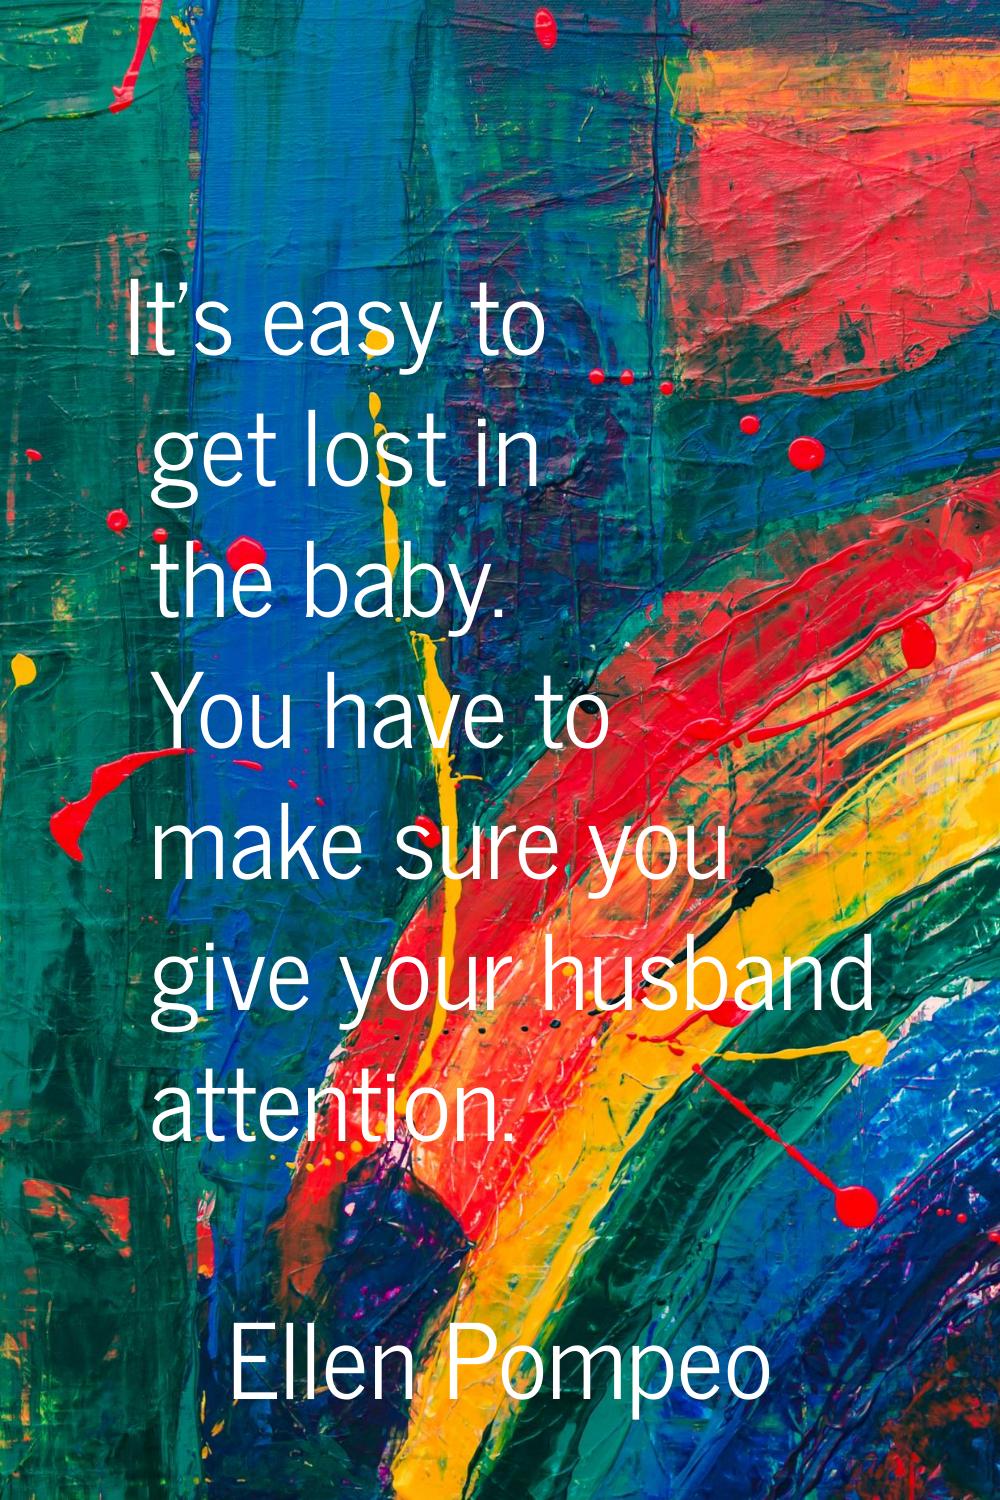 It's easy to get lost in the baby. You have to make sure you give your husband attention.